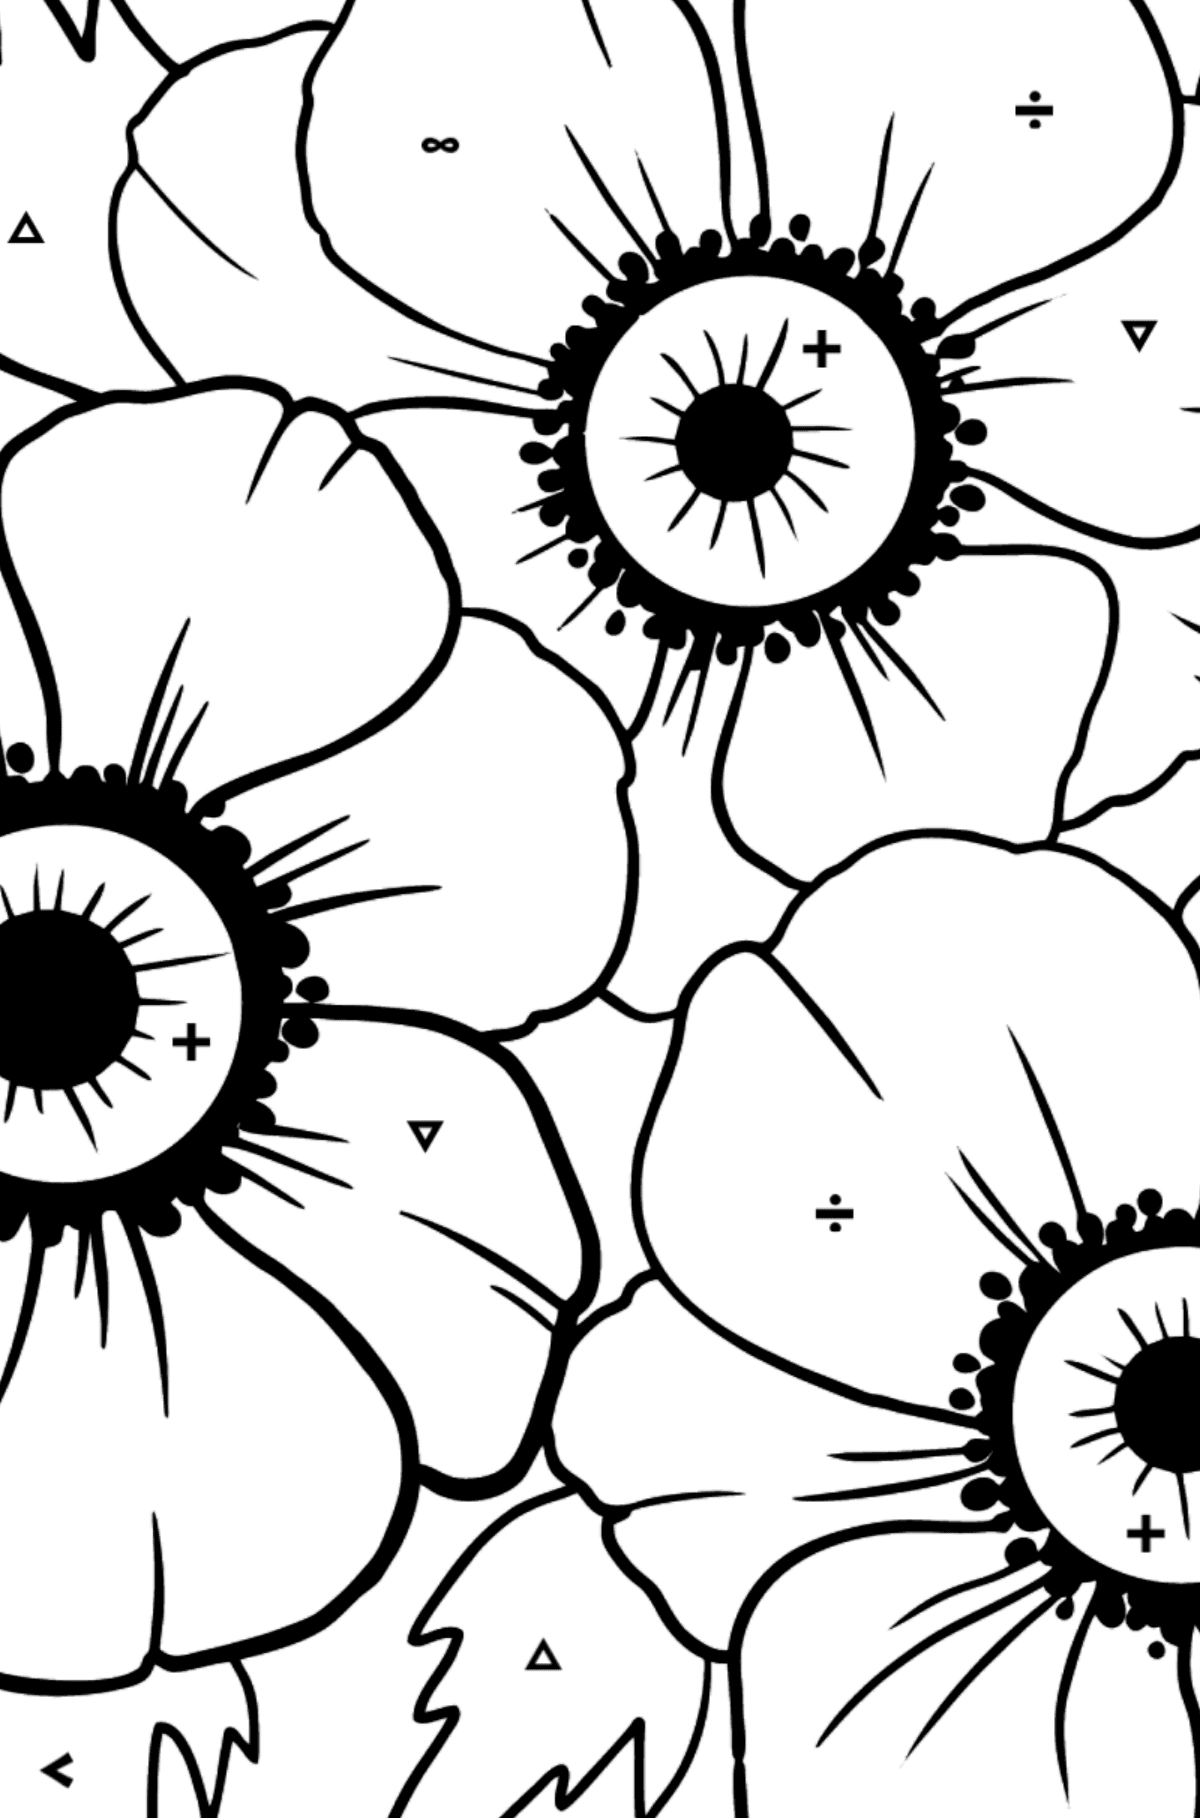 Flower Coloring Page - A Yellow and Orange Anemone Coronaria - Coloring by Symbols for Kids